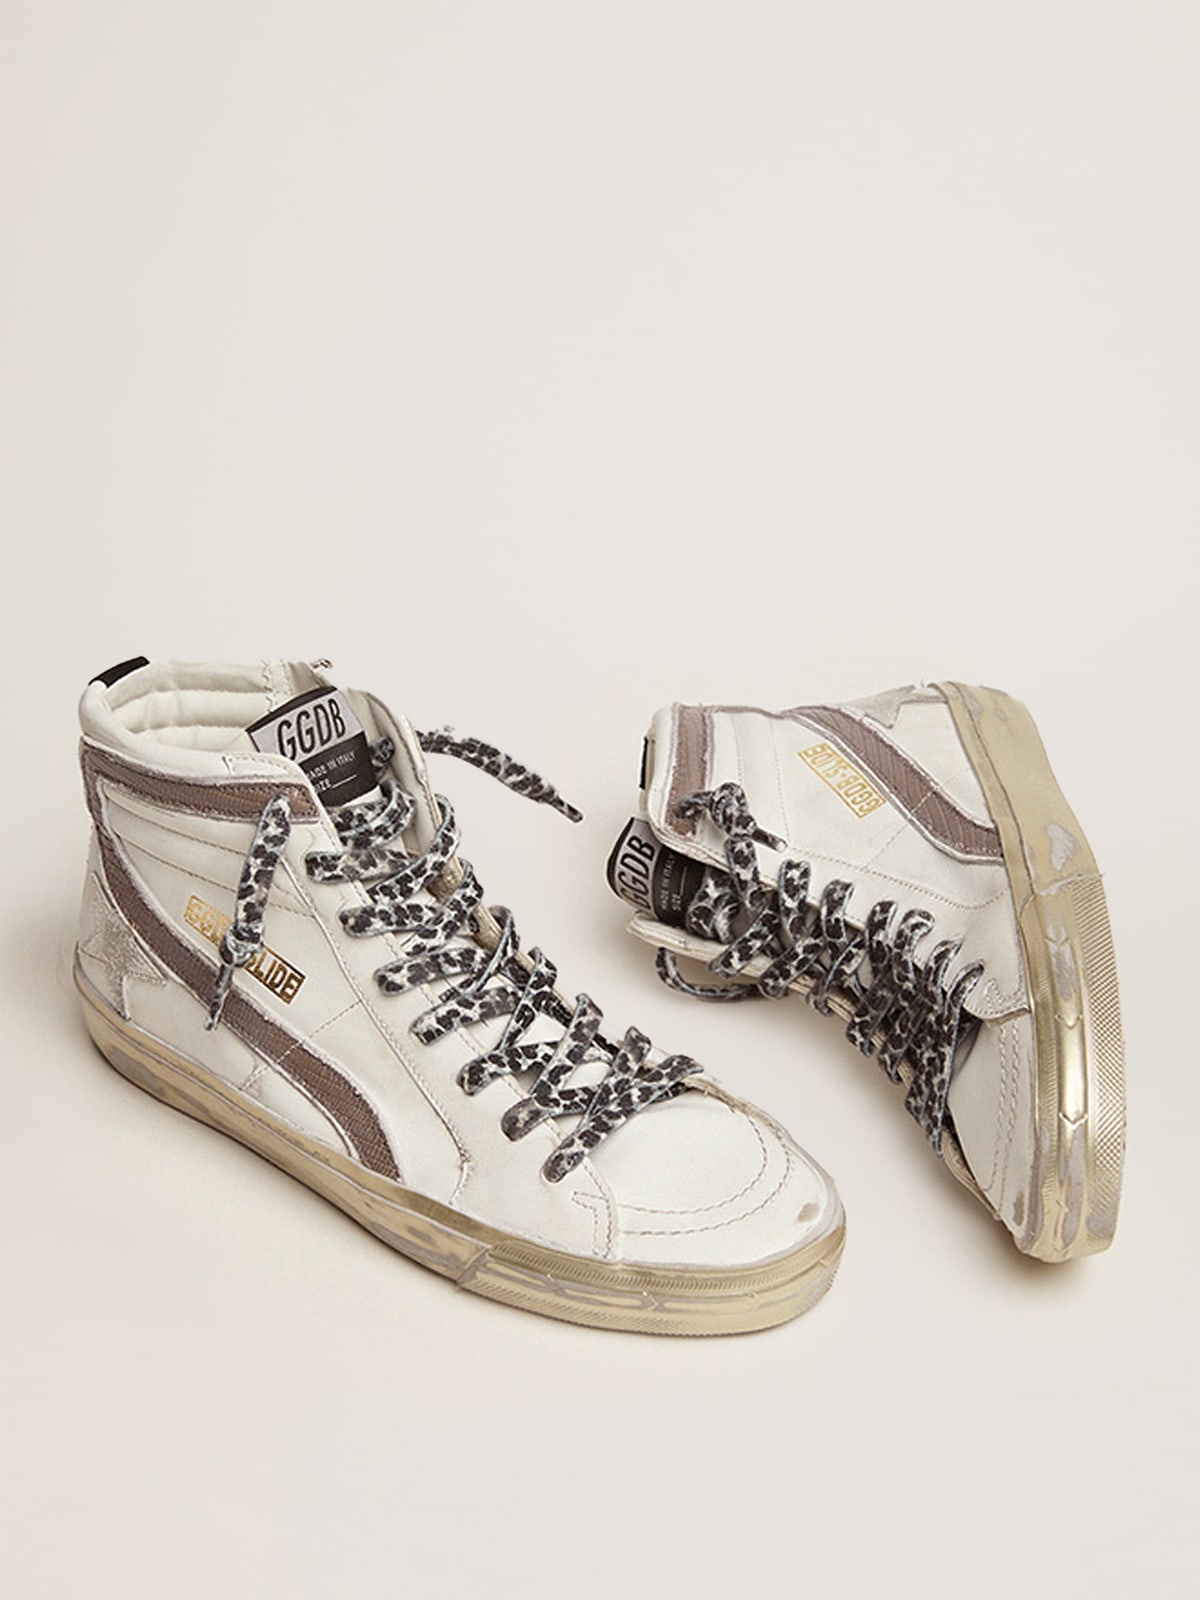 Slide sneakers with white suede star and dove-gray lizard-print leather flash - 2